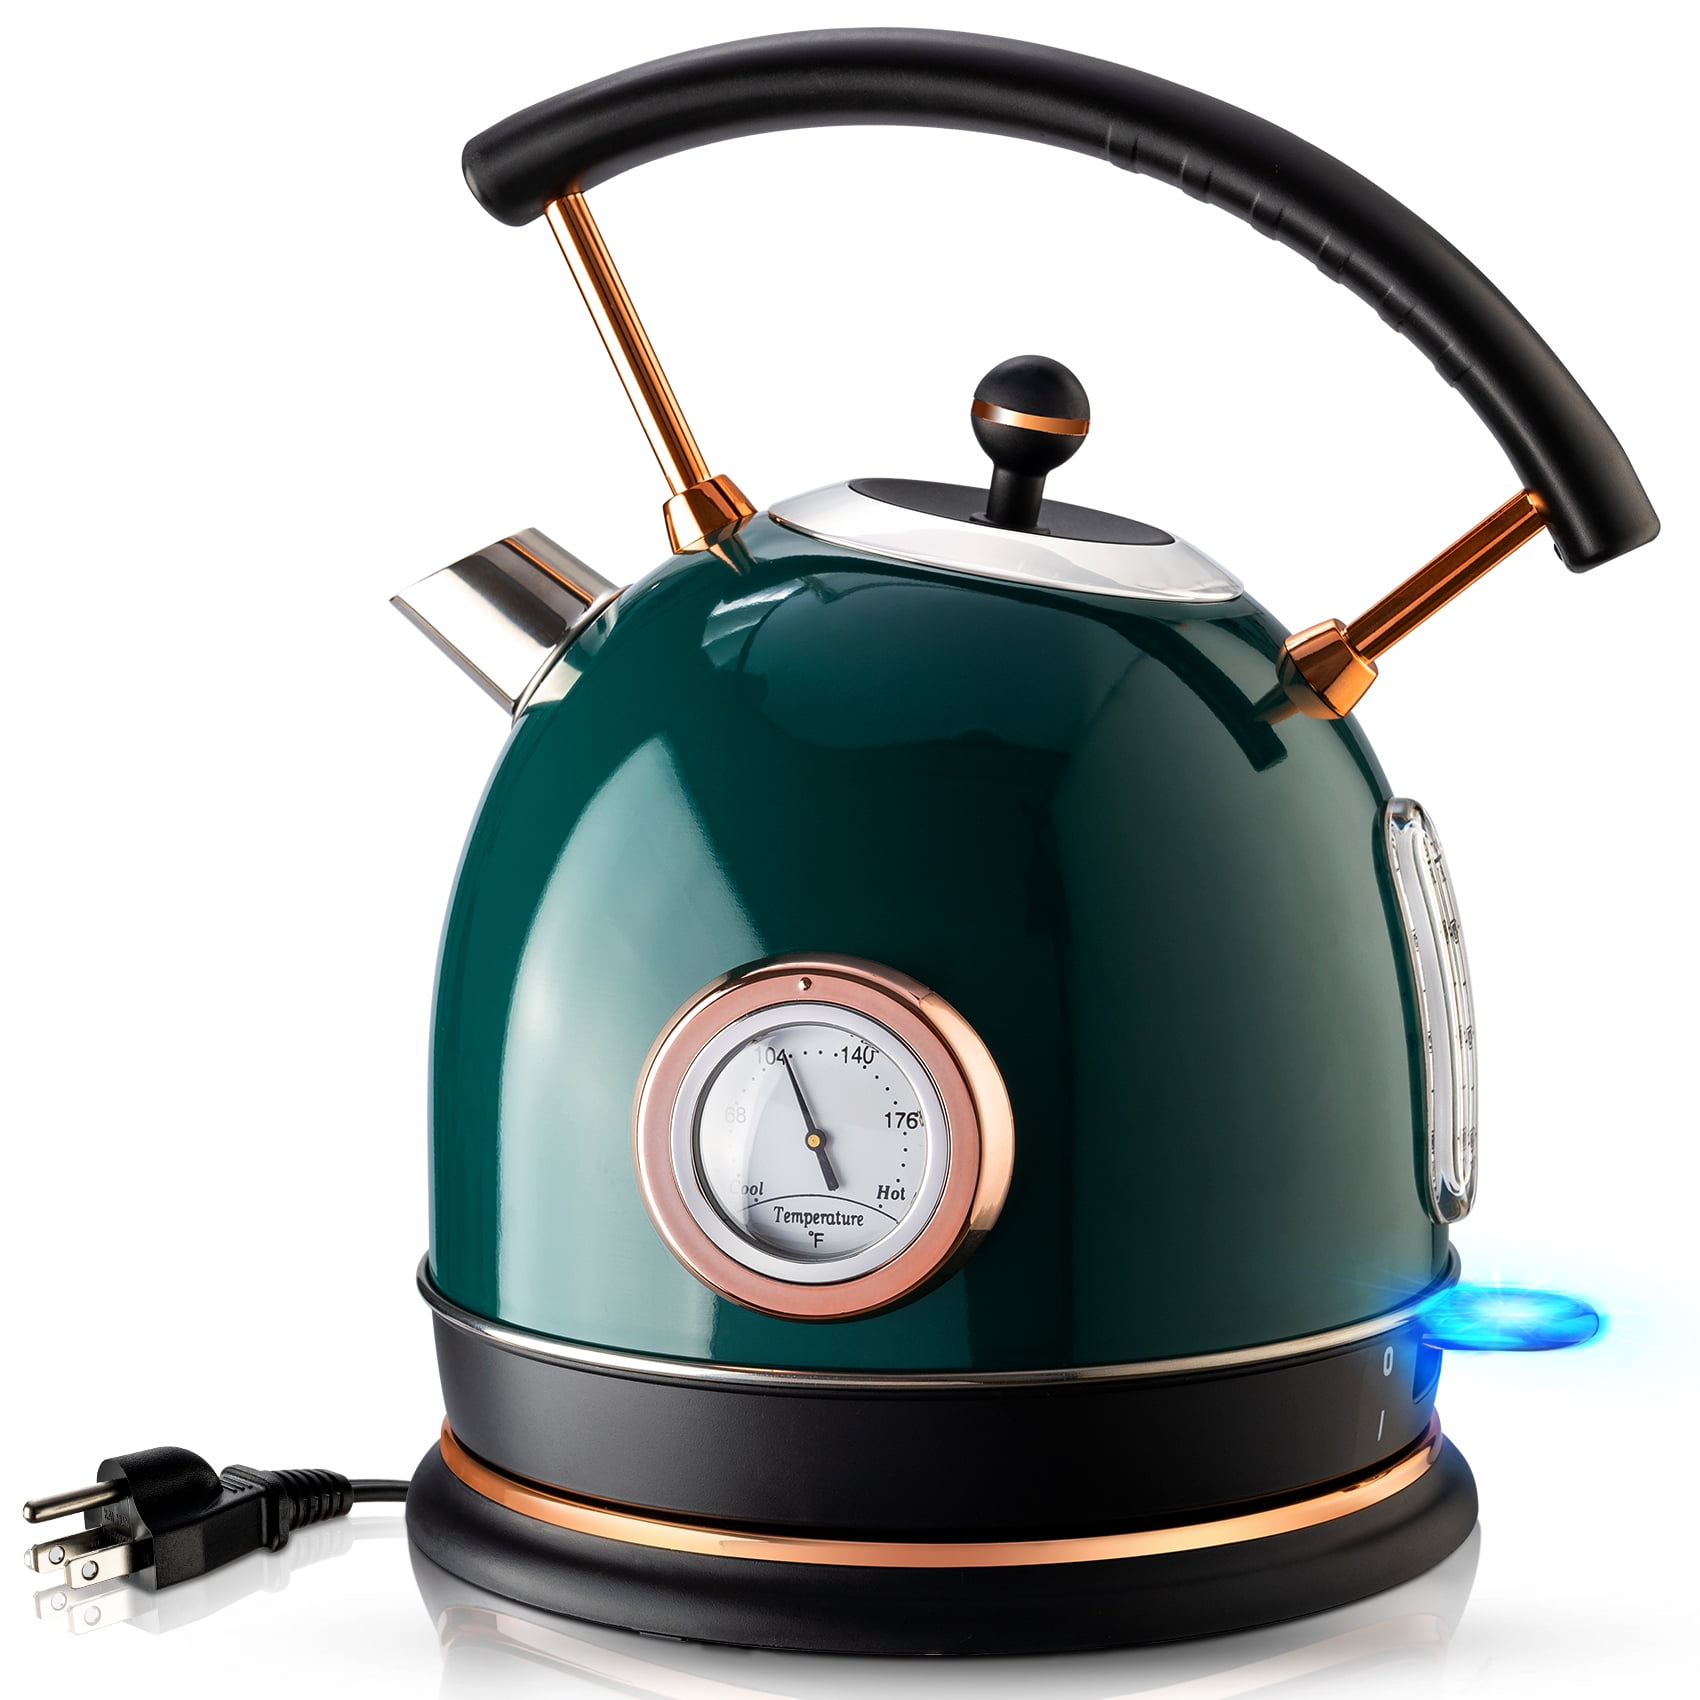  Electric Kettle，Smart Quiet Water Boiling Tea kettle Prevent  Limescale Rusted Base，Temperature trol with 5 Presets，30min Keep Warm，Boil-Dry  Protection, Electric Hot Water Kettle for Tea and Coffee: Home & Kitchen